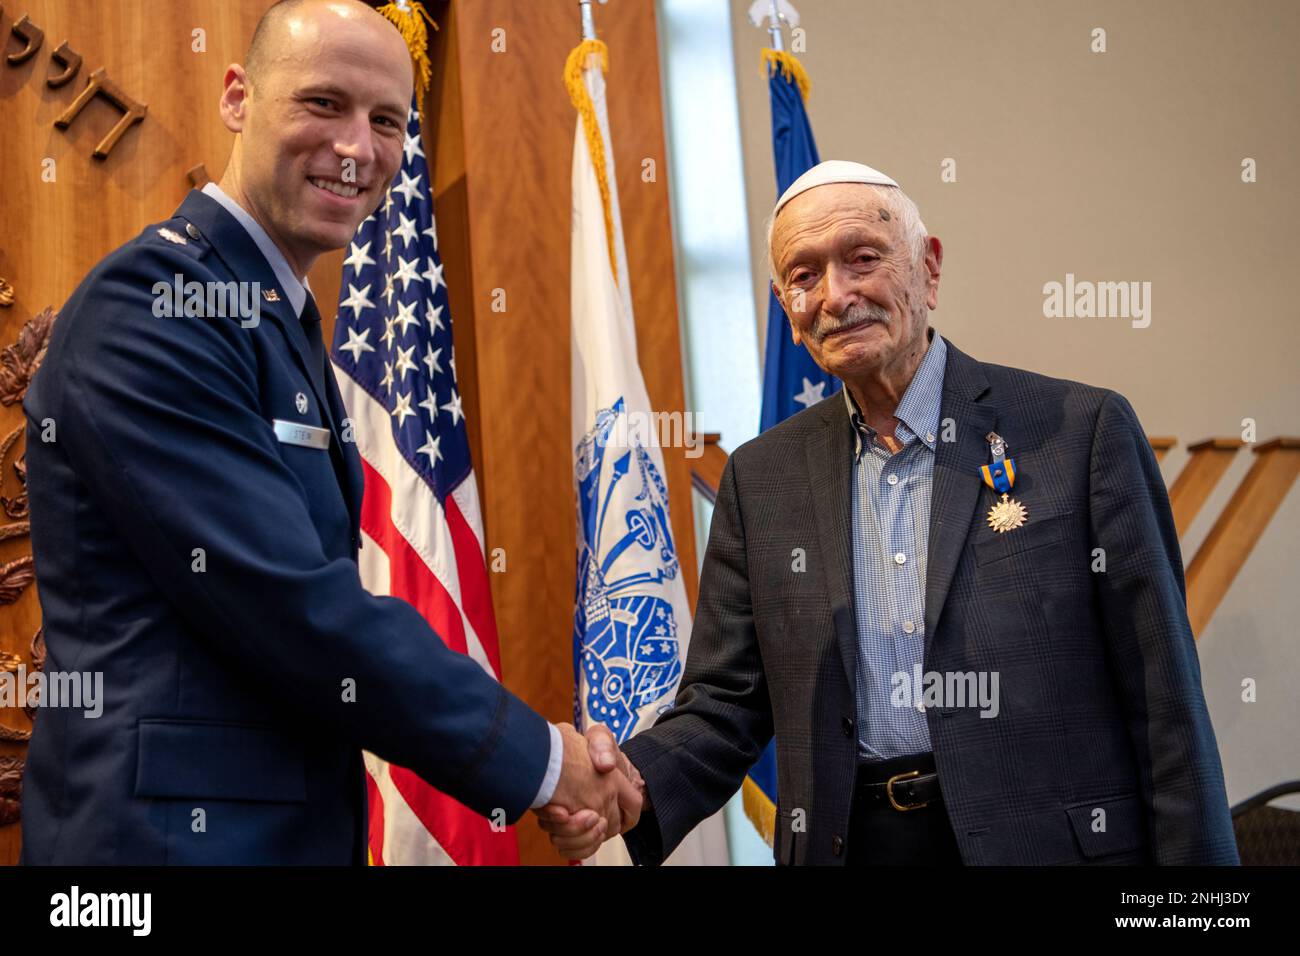 U.S. Air Force Lt. Col. Stein (left), 502nd Operations Support Squadron commander, presents U.S. Army Air Corps 1st Lt. Gerald Teldon, retired, with the Air Medal for his honorable service as a pilot on July 29, 2022, at the Chabad Center for Jewish Life and Learning, San Antonio, Texas. Teldon, born in the Bronx, N.Y., in 1924, joined the military in 1944. He completed 62 missions during WWII and the Korean War. Lt. Col. Andrew Stein, 502nd Operations Support Squadron commander, was the presiding officer. The awards presented to Teldon are as follows: the Air Medal; American Campaign Medal; E Stock Photo